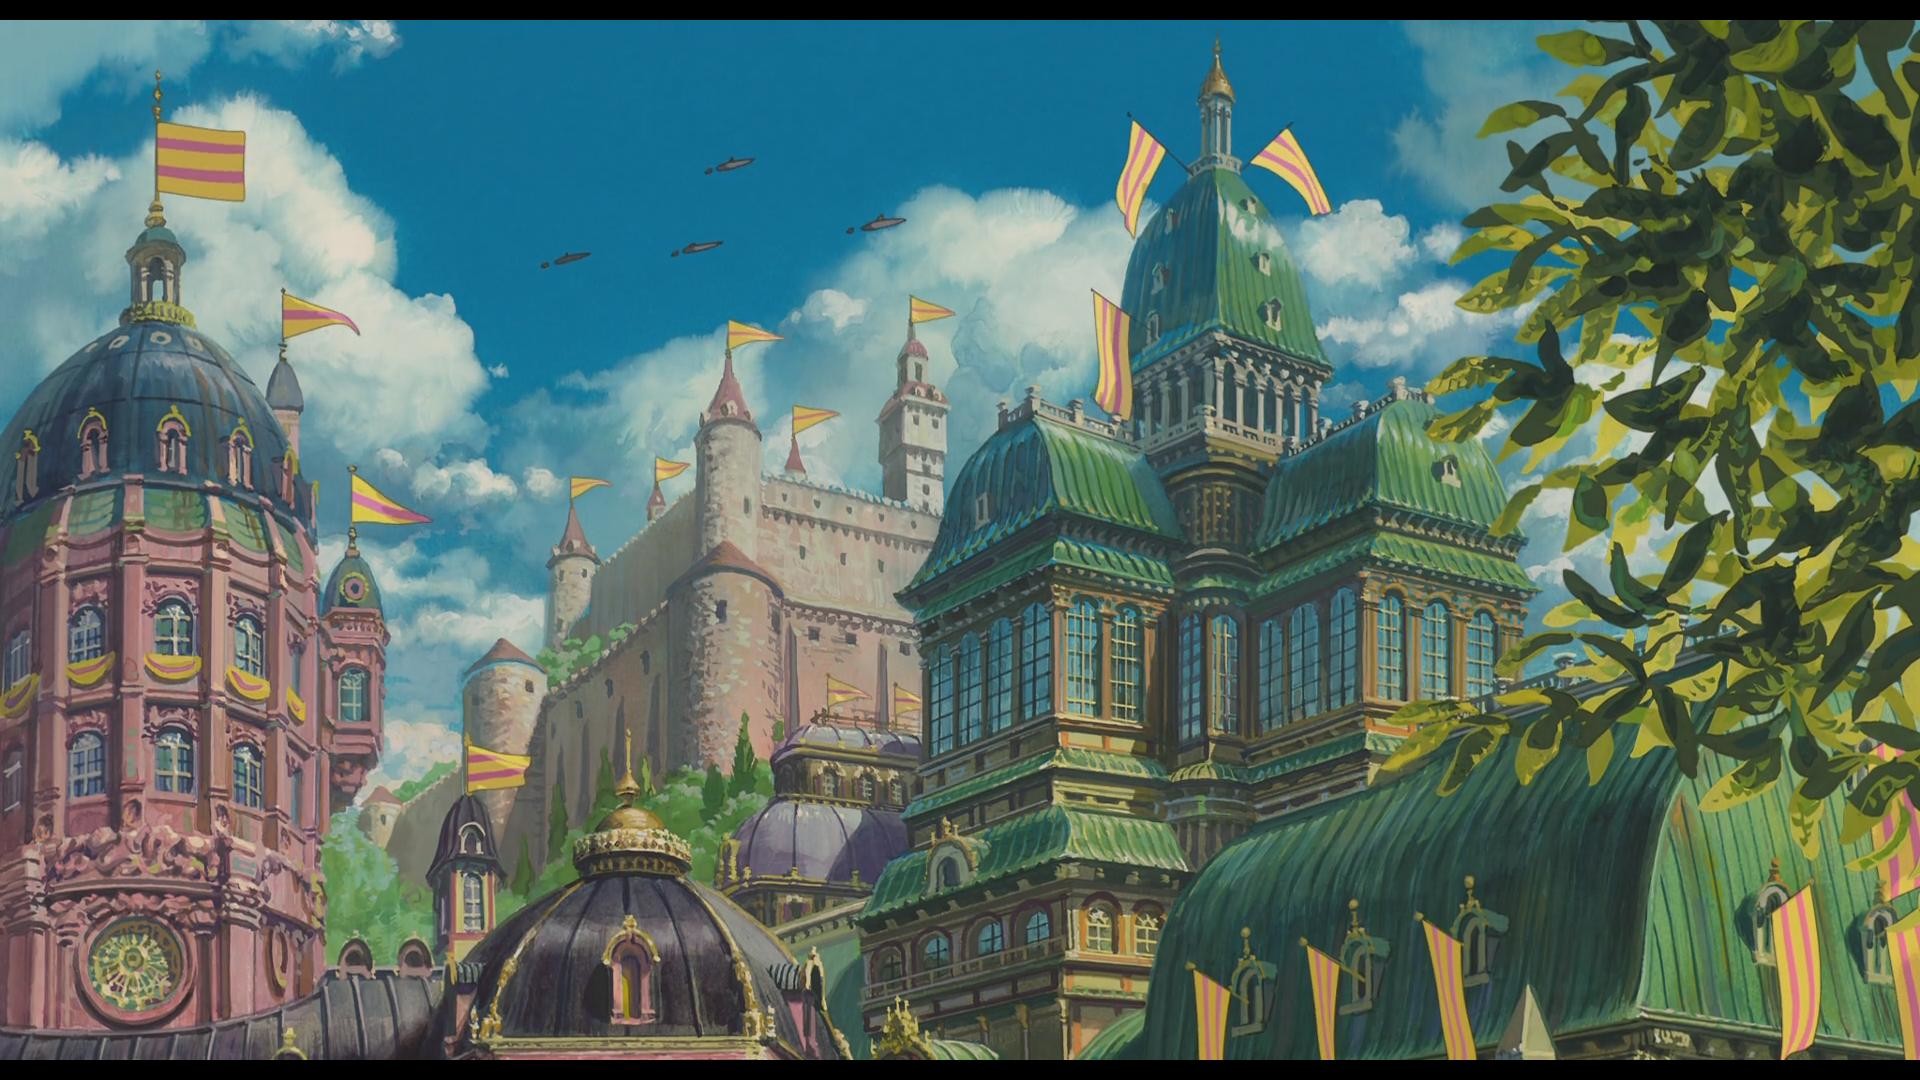 Howls moving castle wallpaper images 8 – HD Wallpapers Buzz